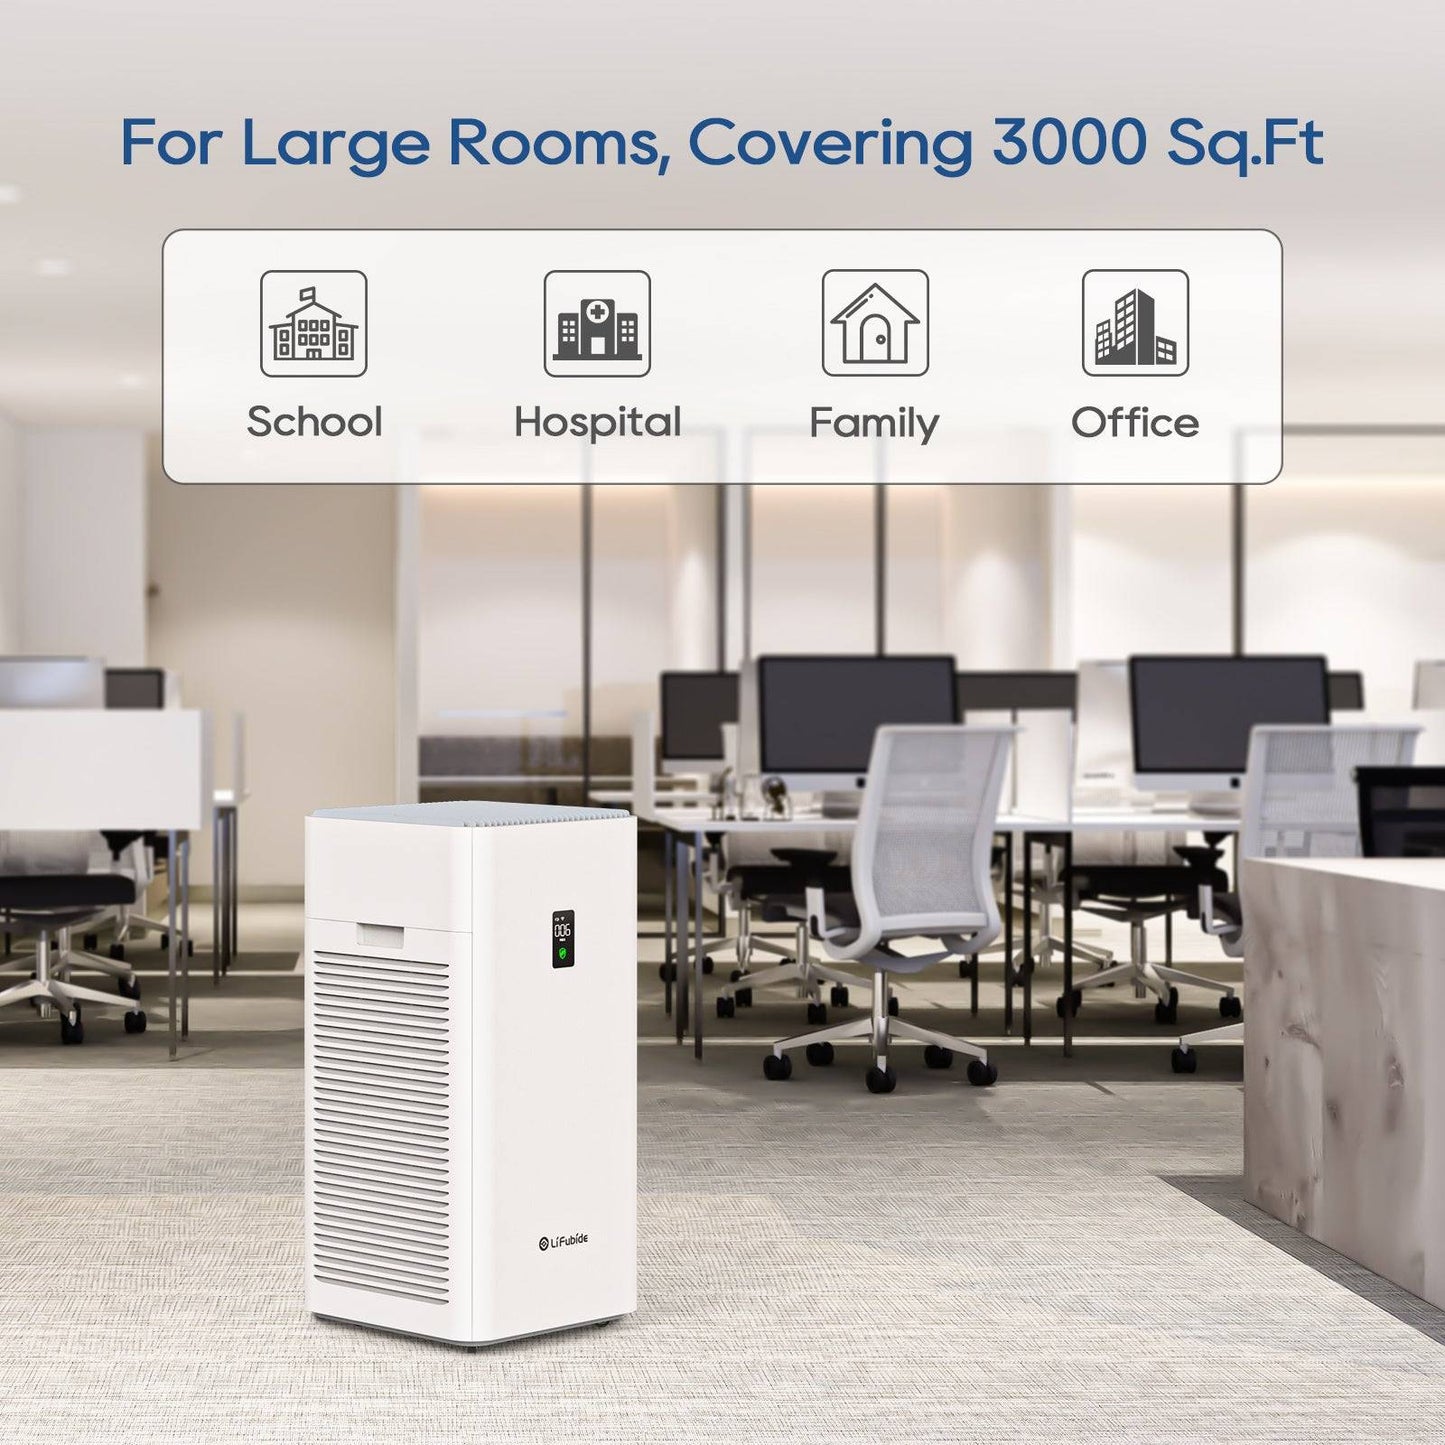 Lifubide Large Room Air Purifier, H13 True HEPA,4555 Sq.Ft Coverage,24dB Low Noise For Bedroom, Removal Of 99.99% 0.01 Microns Particles